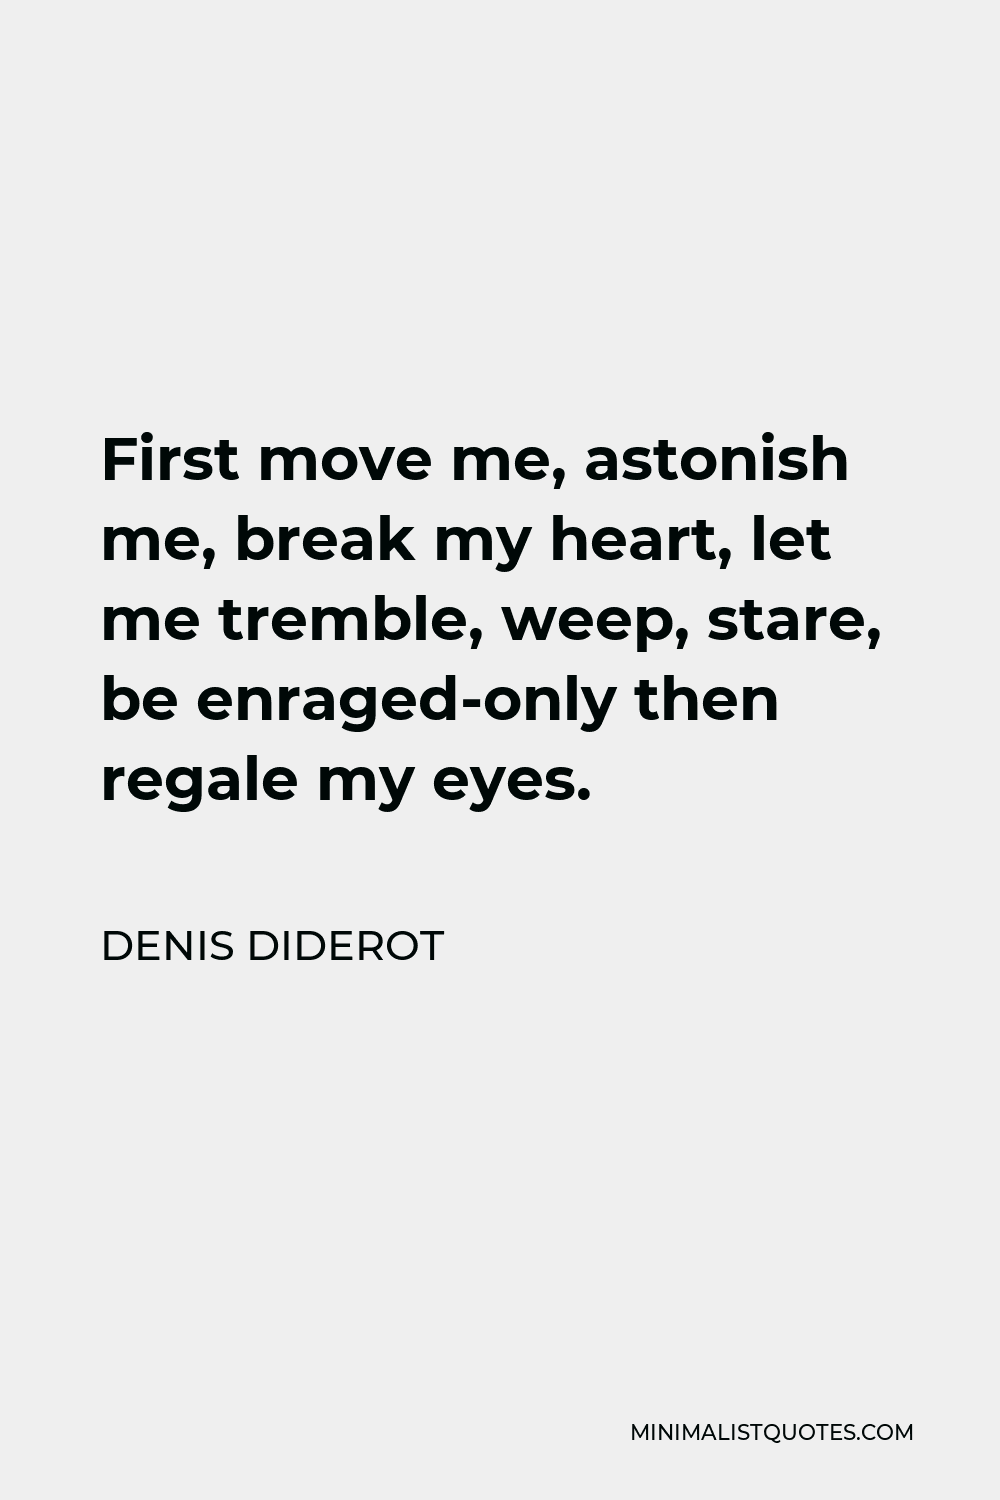 Denis Diderot Quote - First move me, astonish me, break my heart, let me tremble, weep, stare, be enraged-only then regale my eyes.